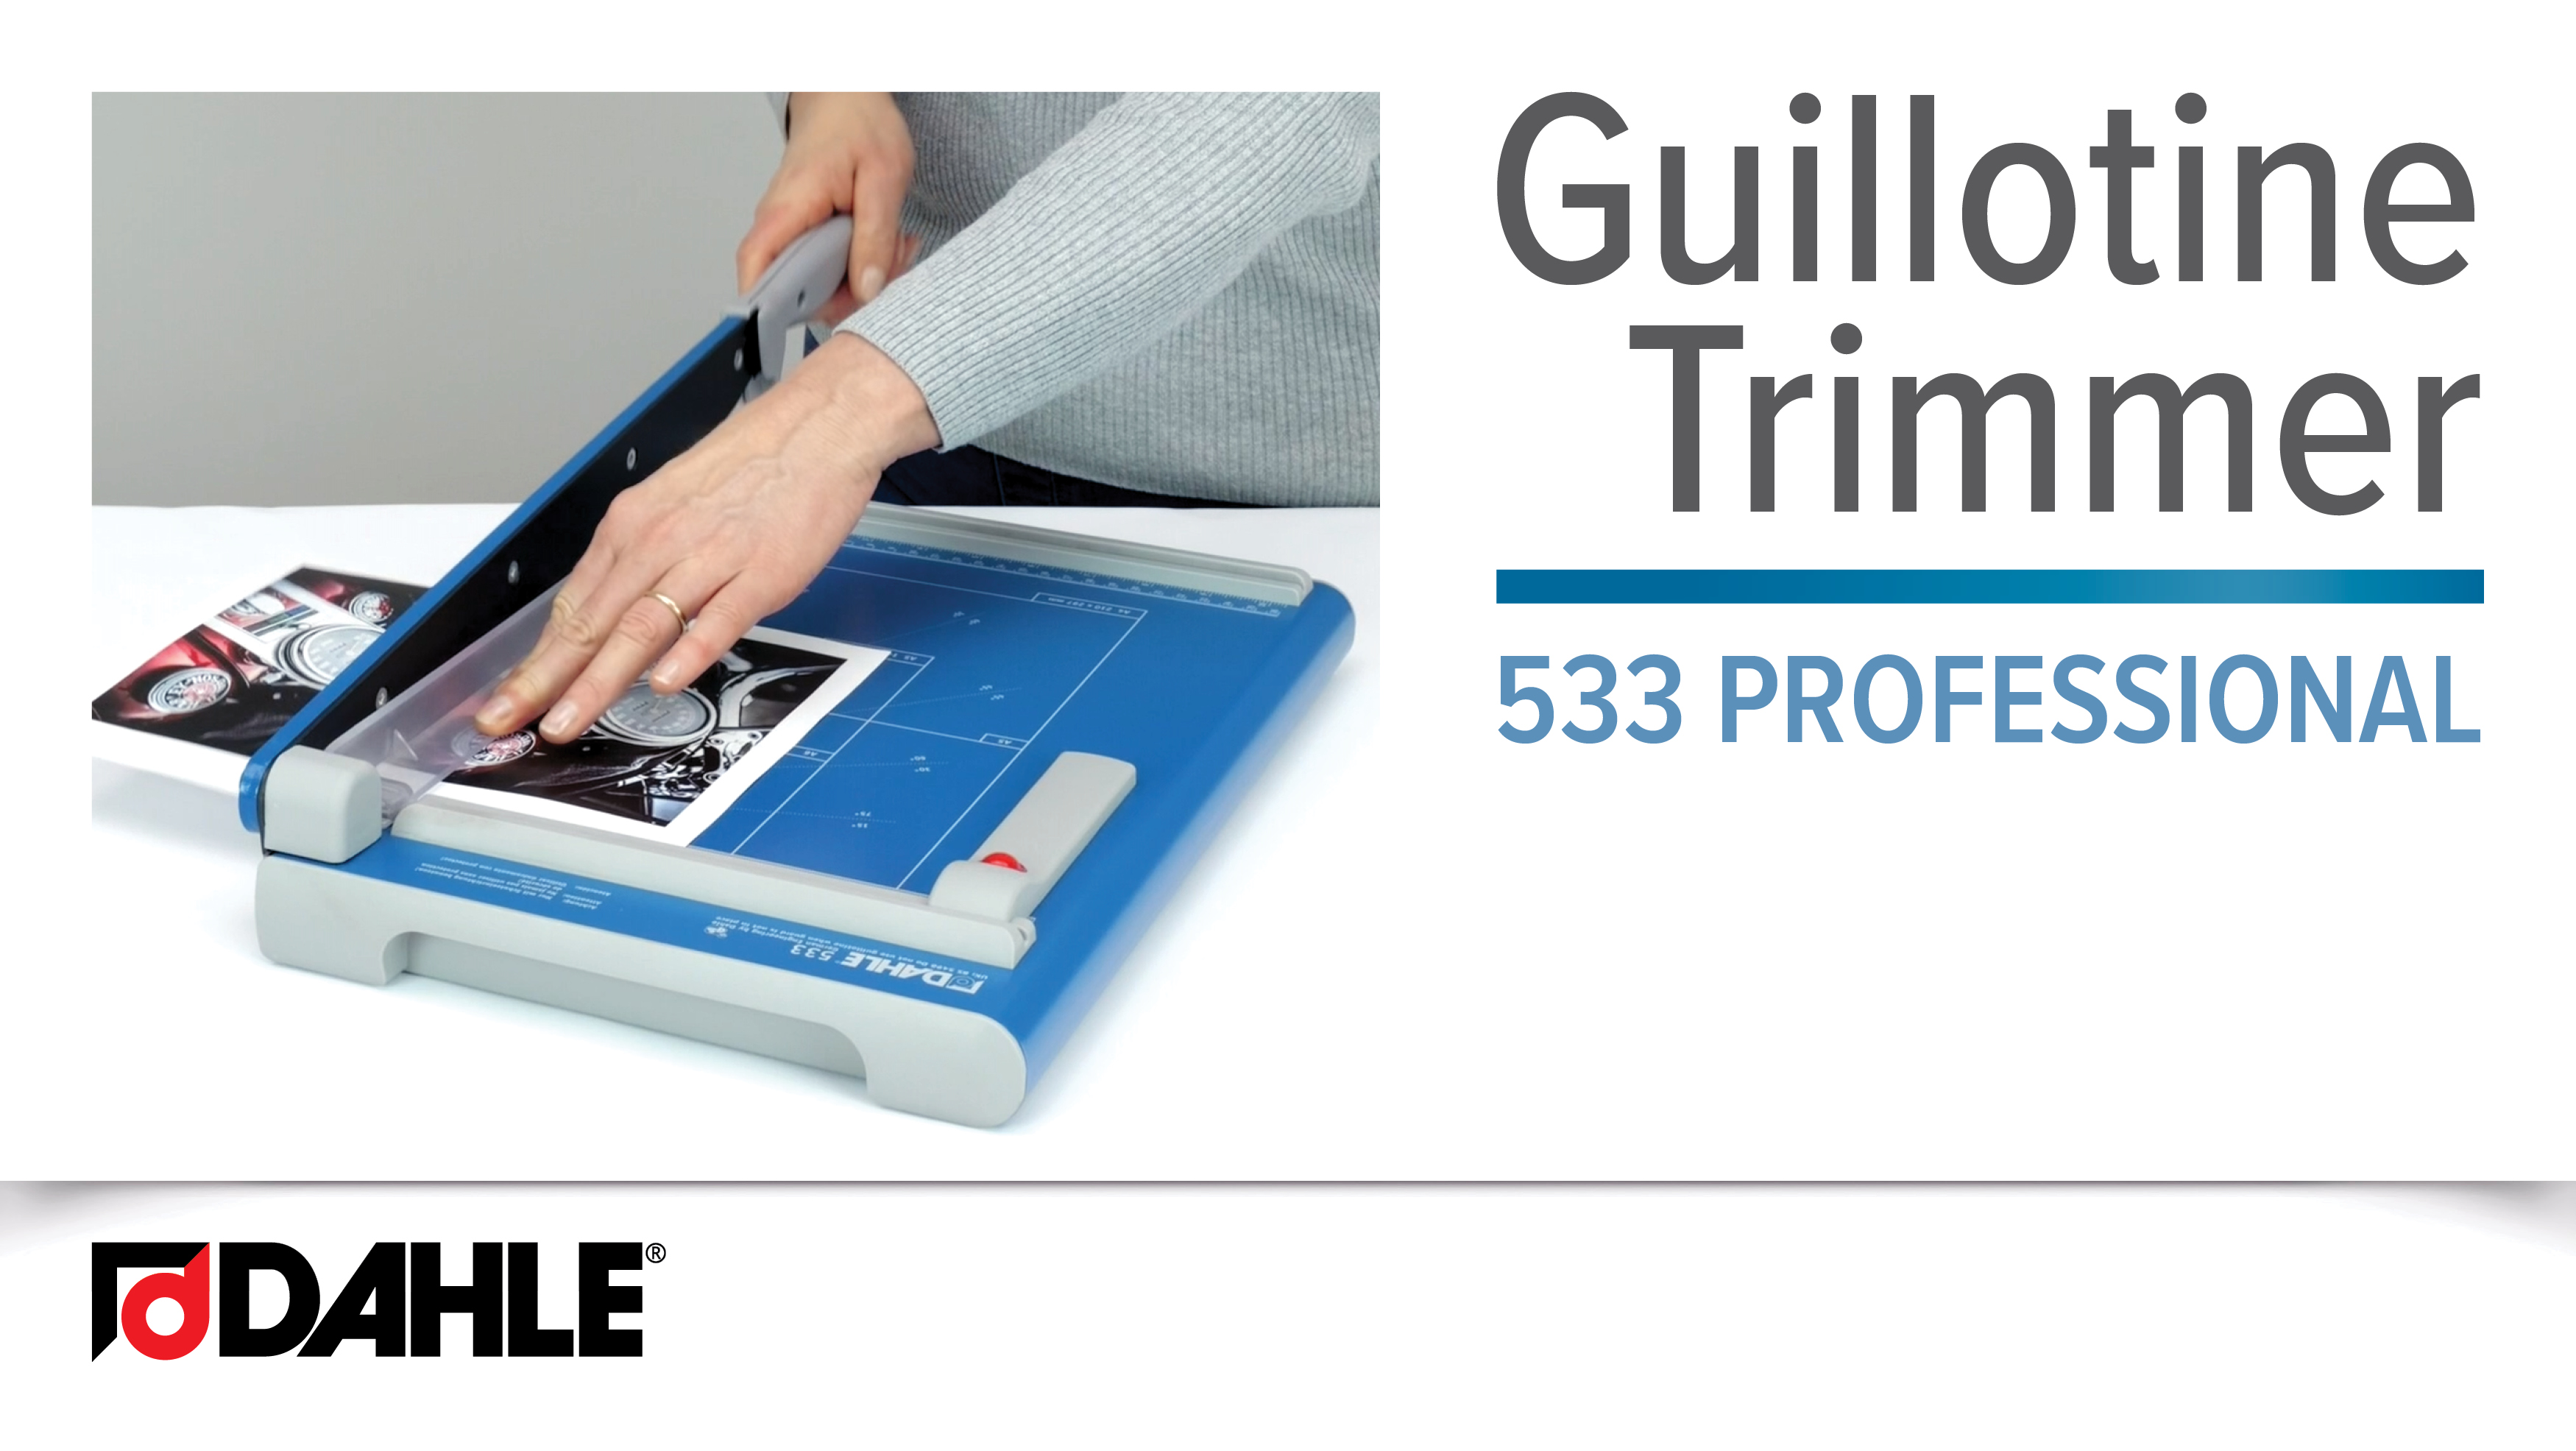 <big><strong>Dahle 533 </strong></big><br>Professional Guillotine